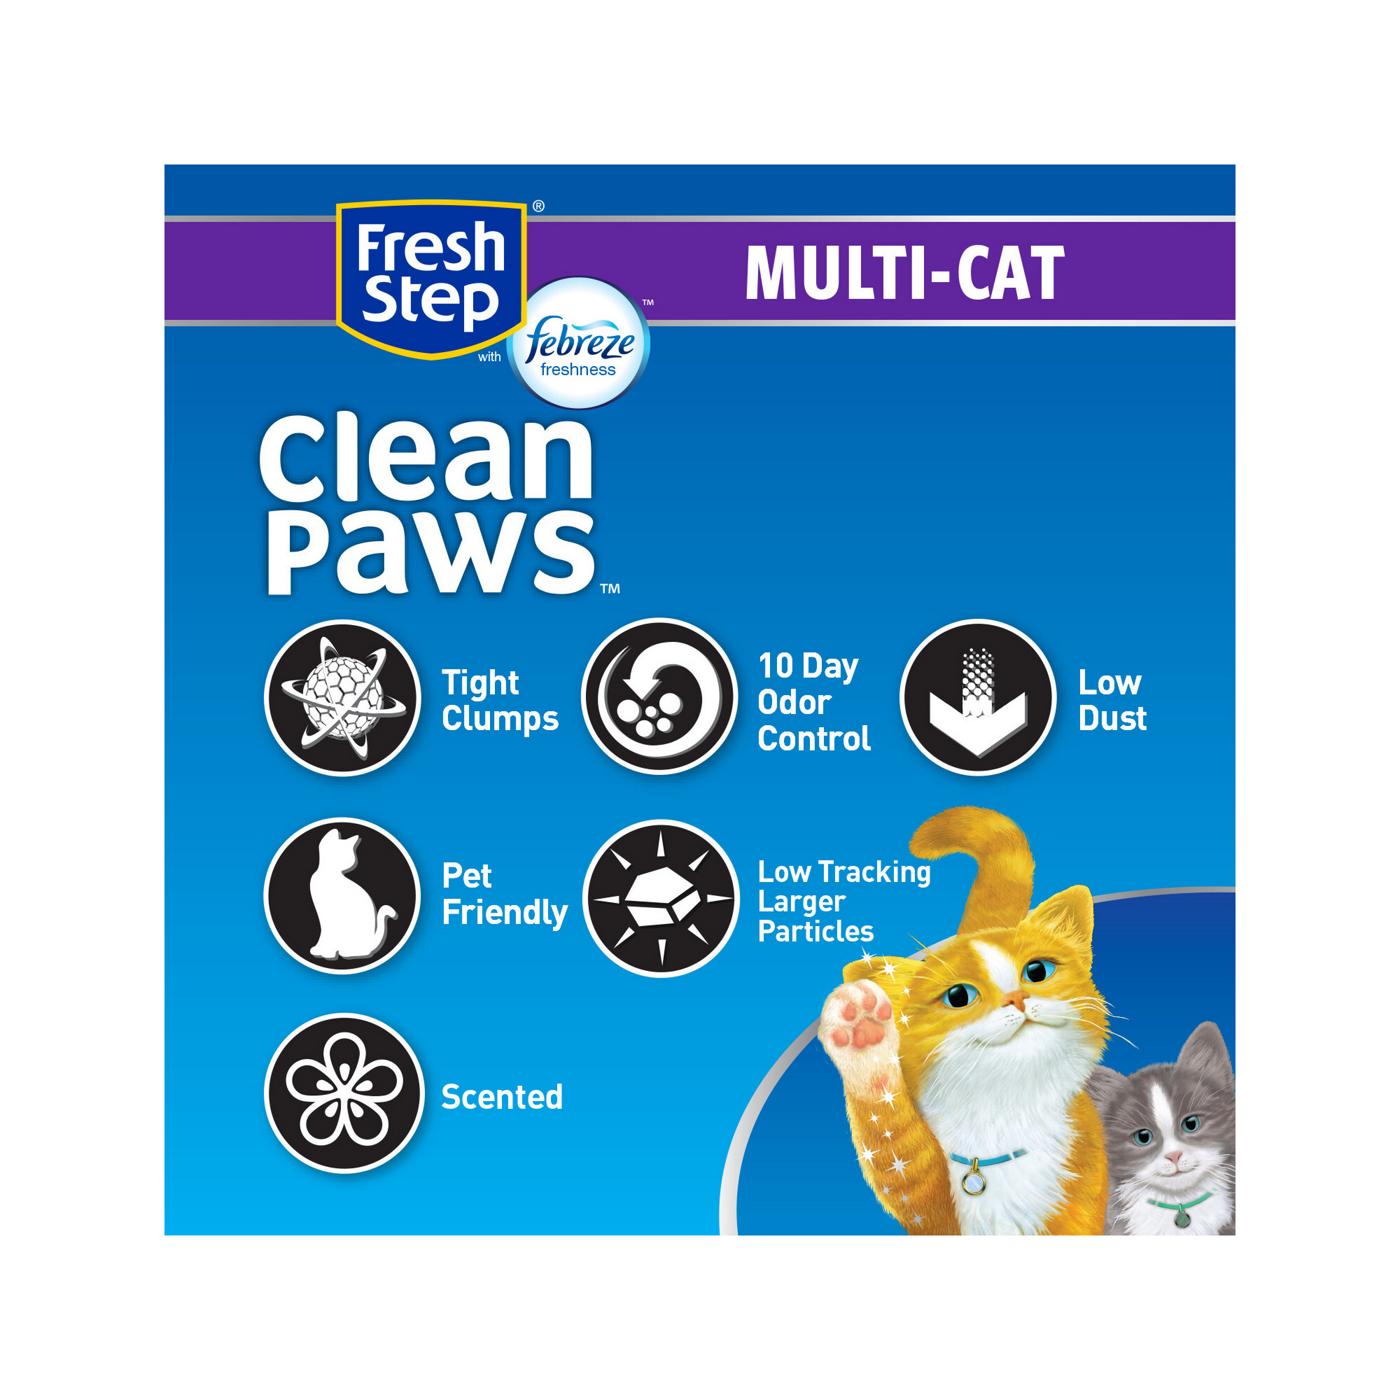 Fresh Step Clean Paws with Febreze Multi-Cat Clumping Litter; image 2 of 6